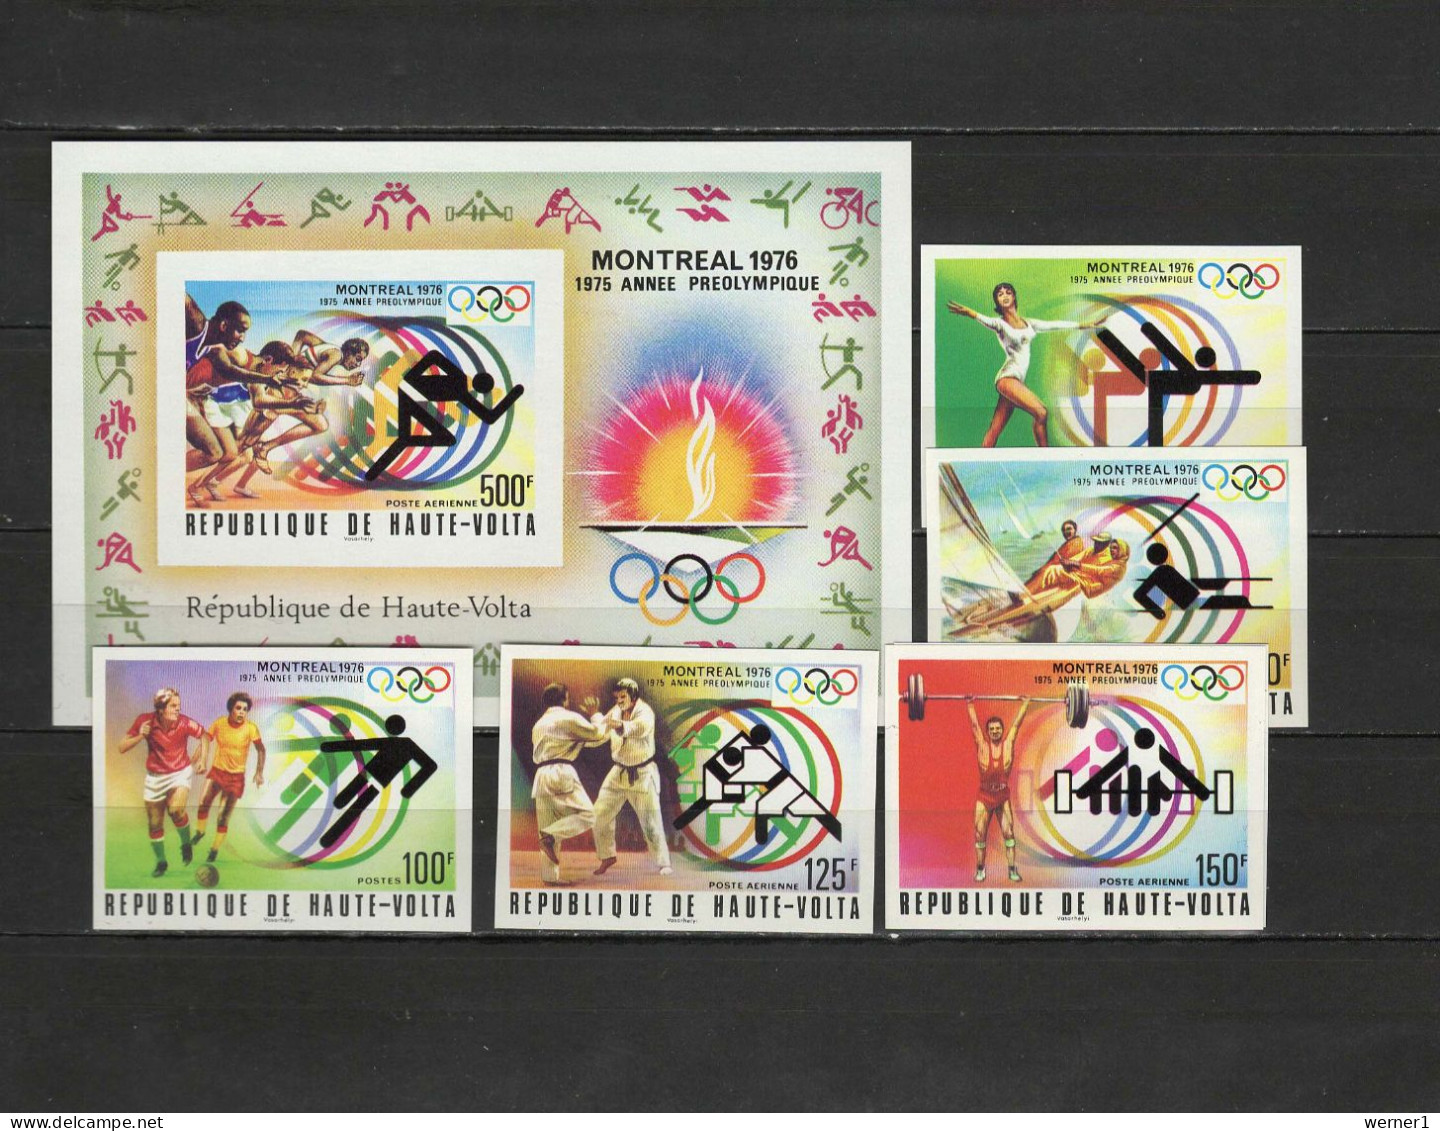 Burkina Faso (Upper Volta) 1976 Olympic Games Montreal, Athletics, Football Soccer, Judo Etc. Set Of 5 + S/s Imperf. MNH - Sommer 1976: Montreal